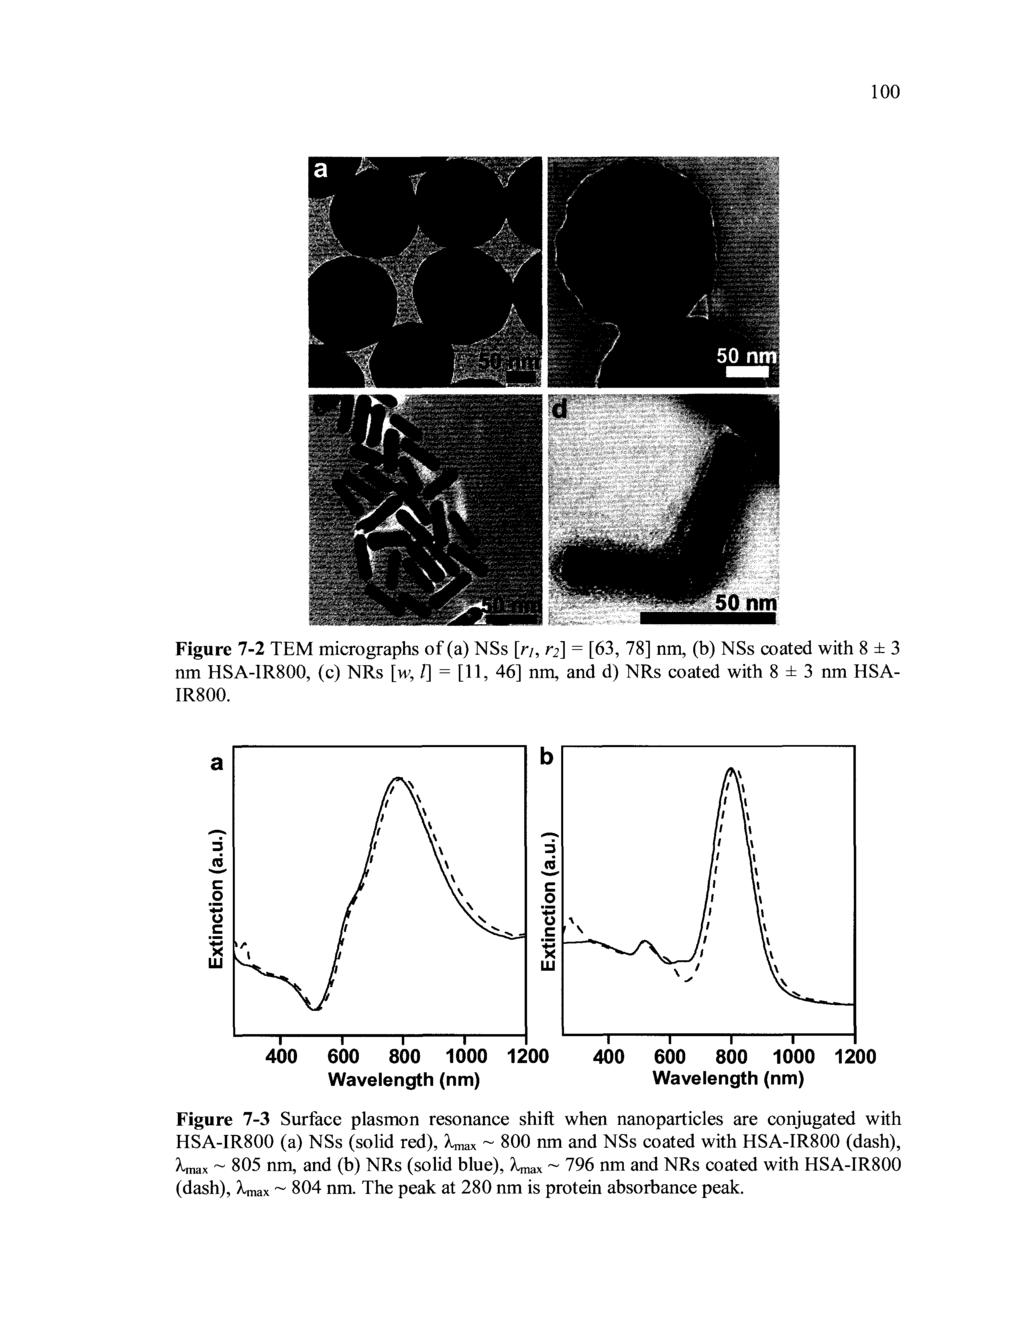 100 Figure 7-2 TEM micrographs of (a) NSs [r,, r 2 ] = [63, 78] nm, (b) NSs coated with 8 ± 3 nm HSA-IR800, (c) NRs [w, I] = [11, 46] nm, and d) NRs coated with 8 ± 3 nm HSA- IR800.